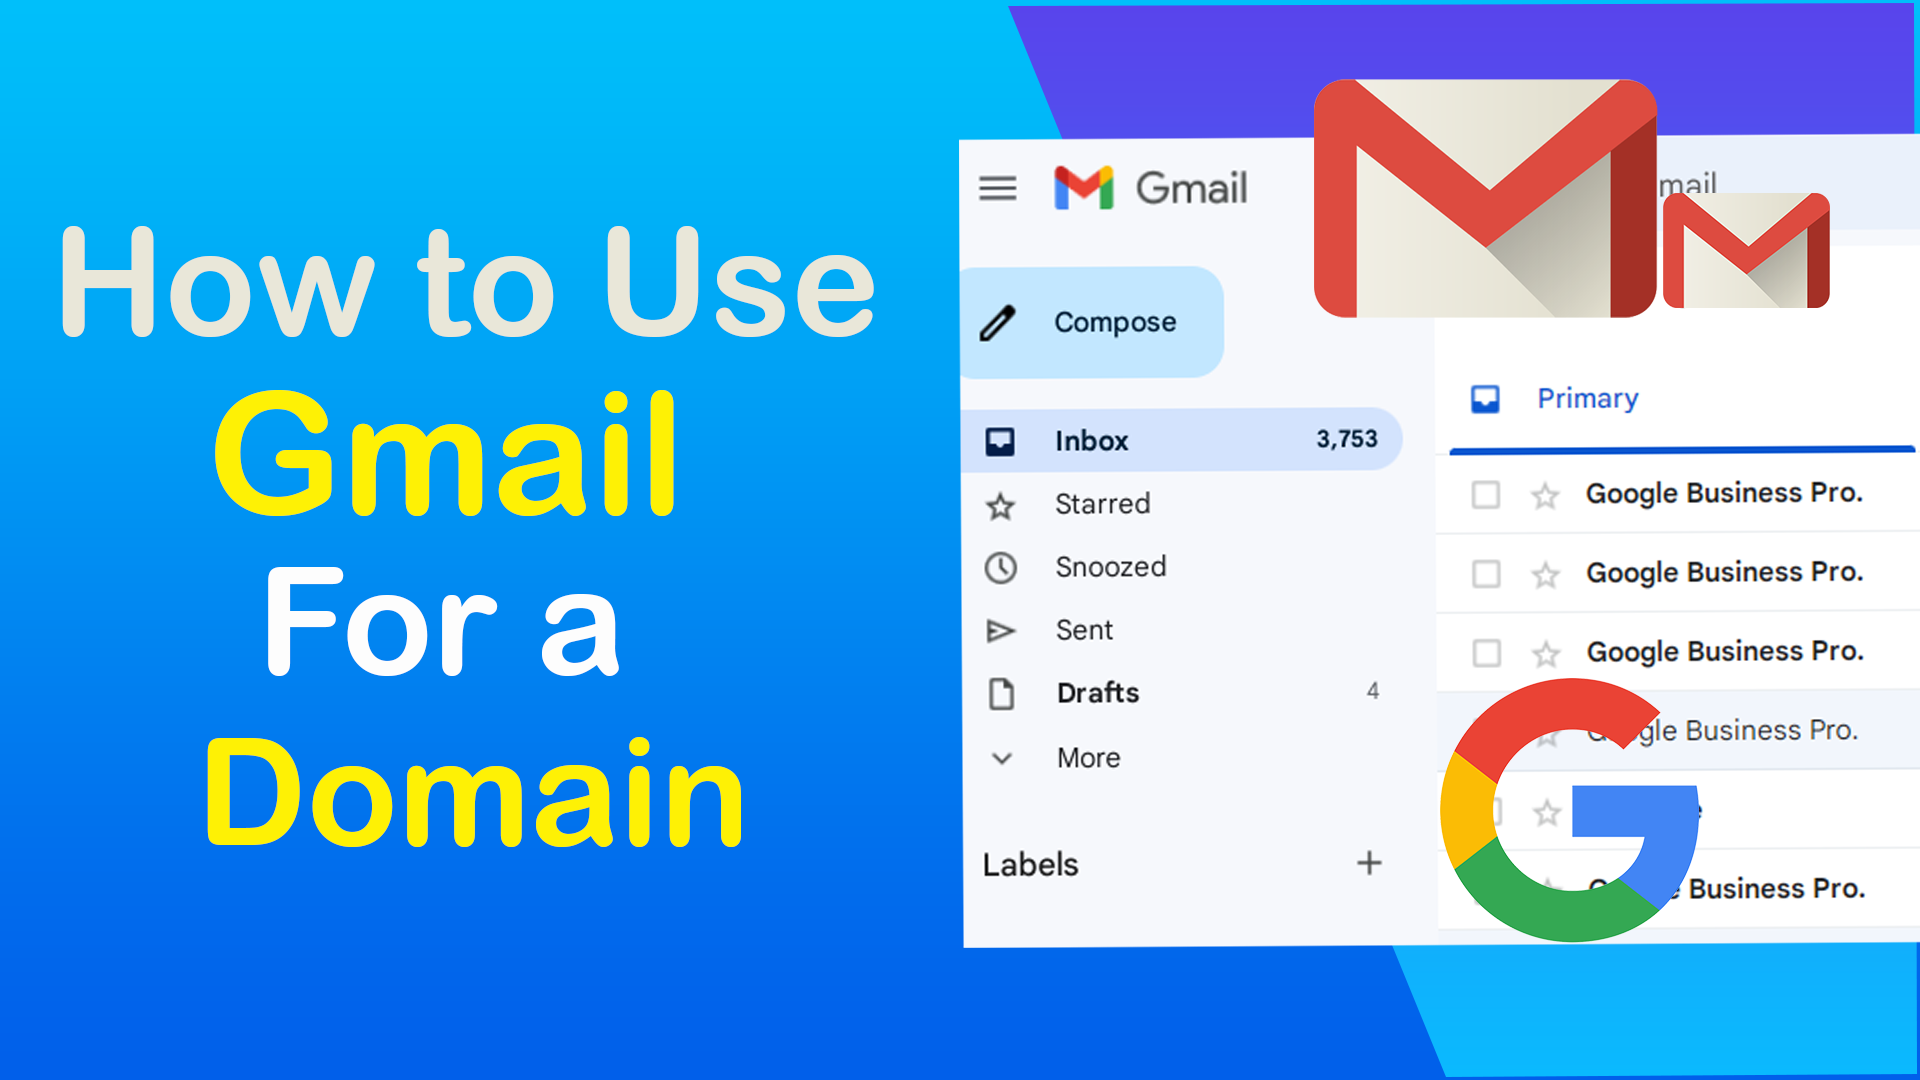 How to use Gmail for a Domain